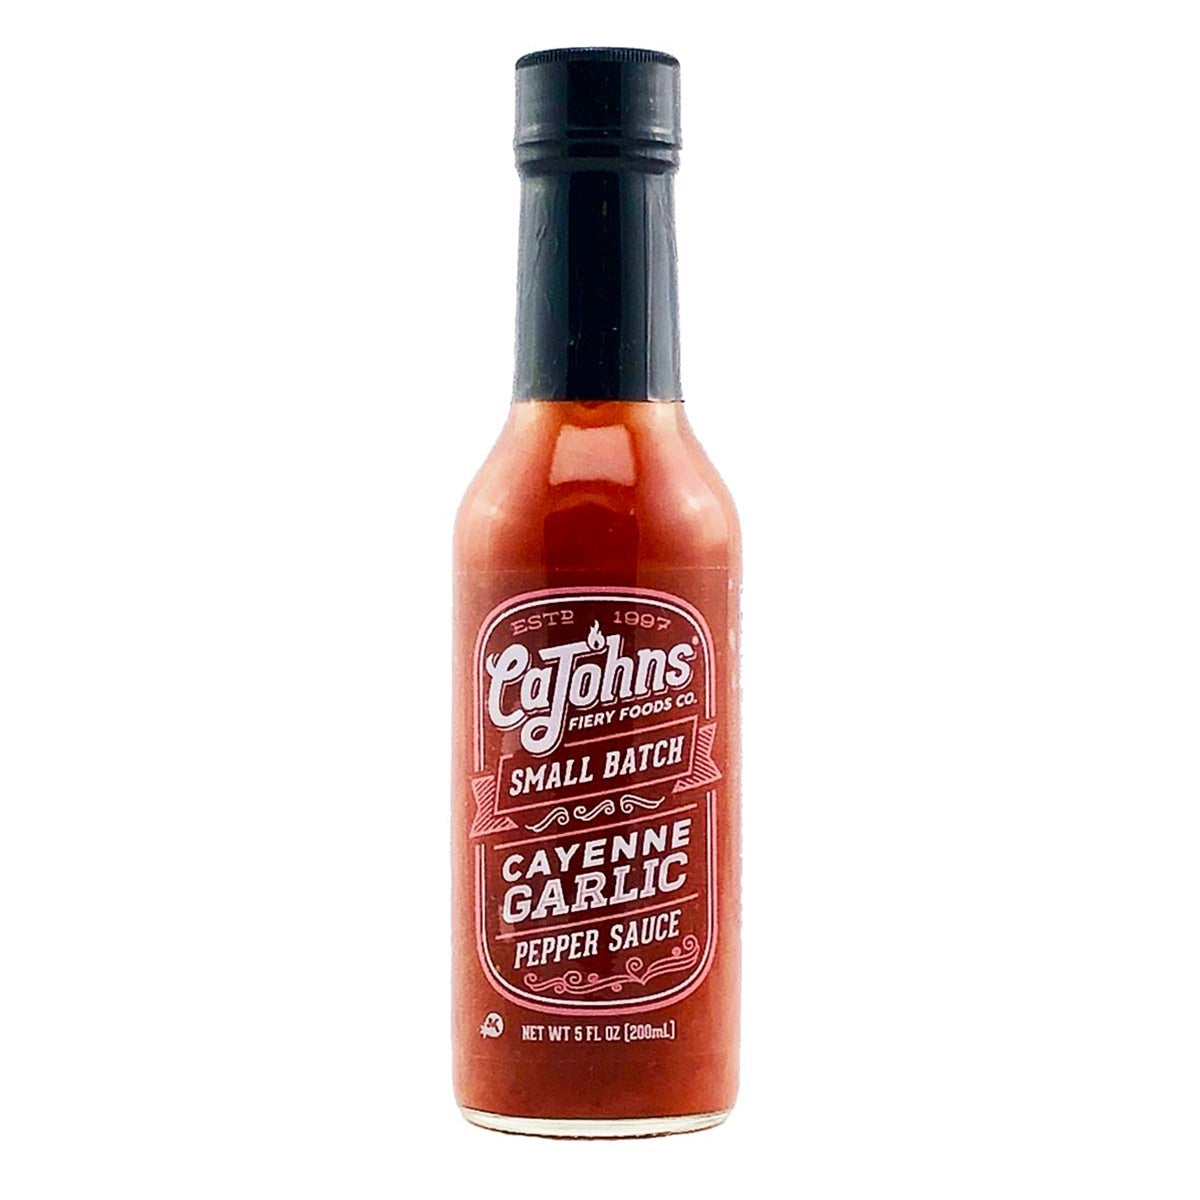 CaJohns Classic Cayenne Pepper Sauce